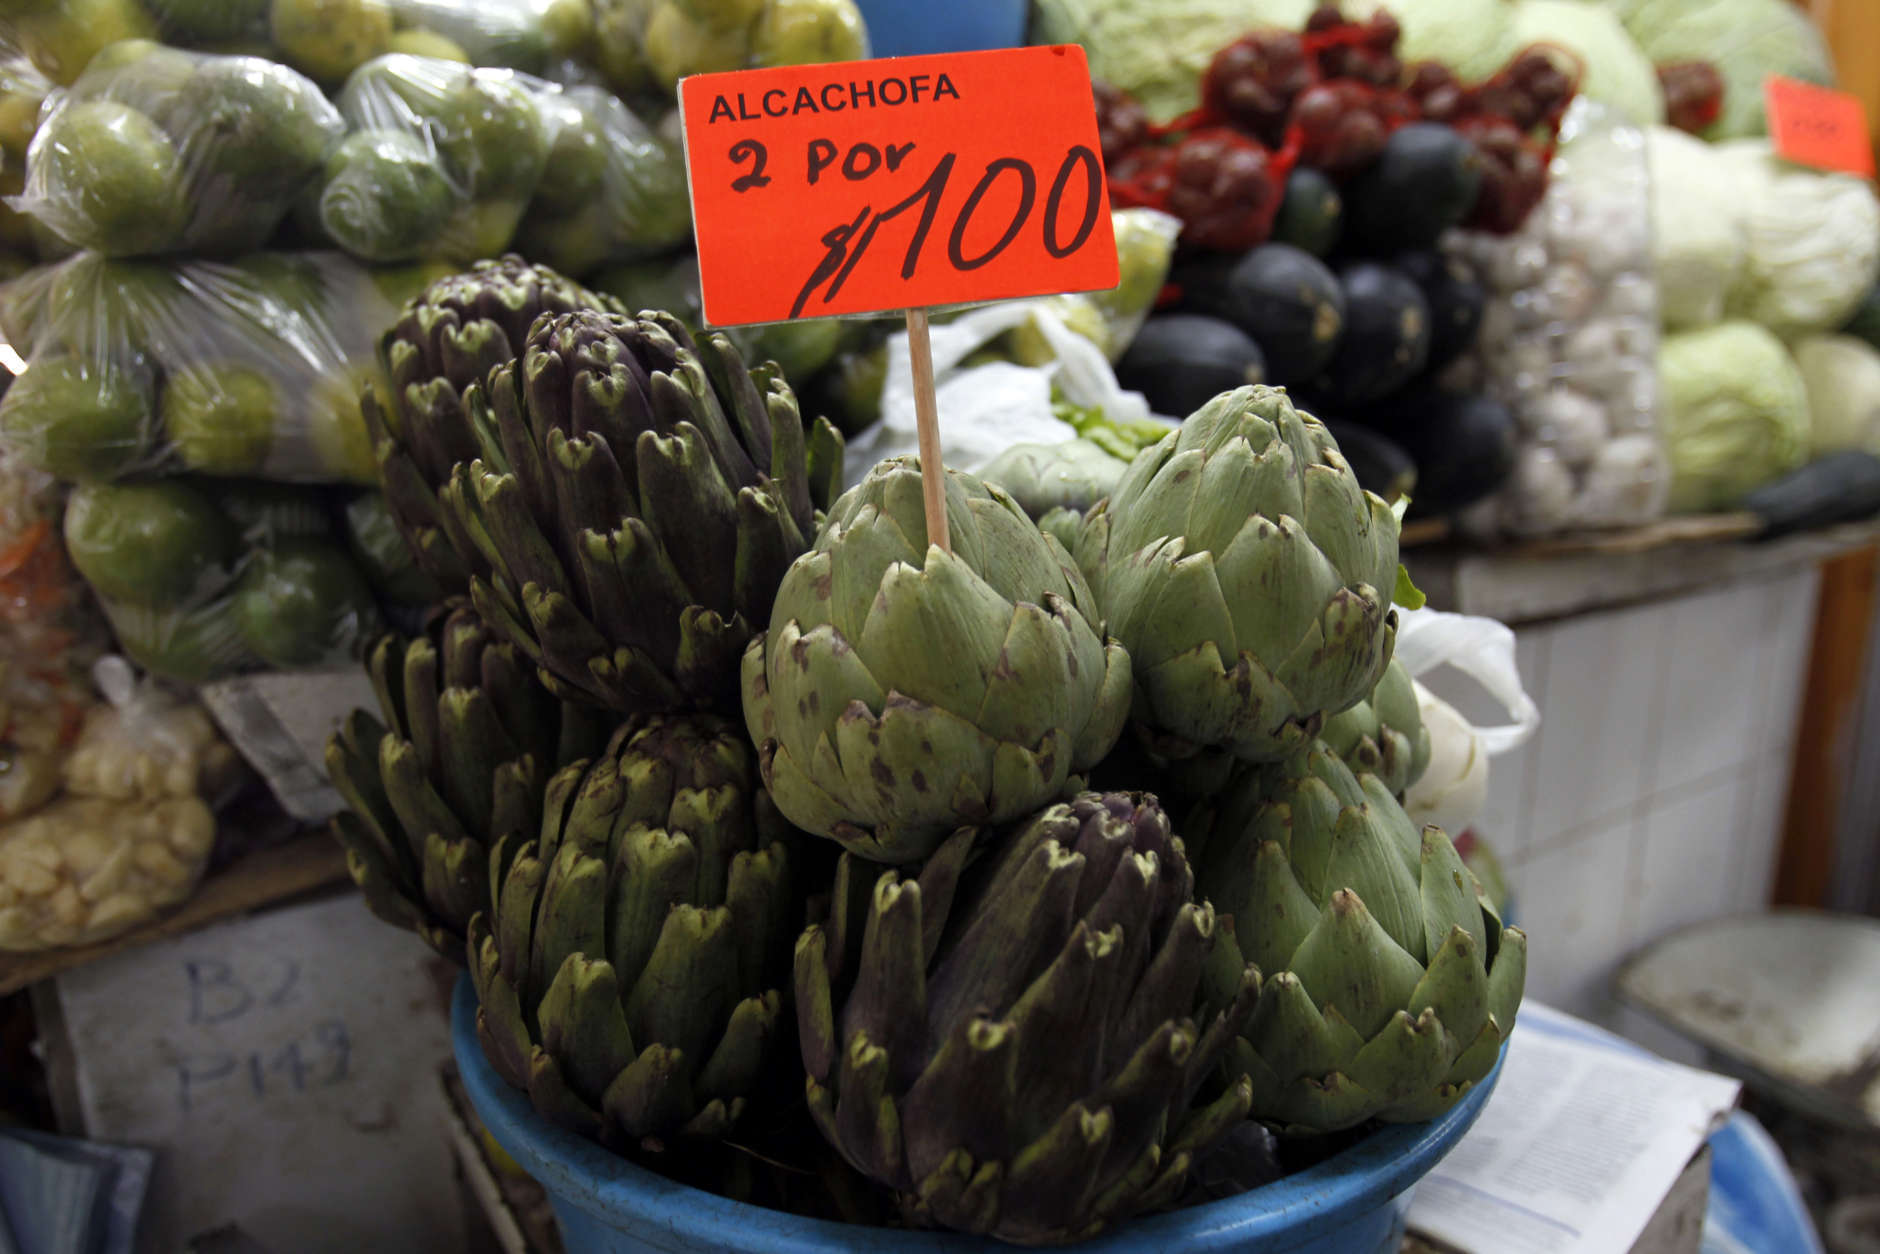 Artichokes sit for sale, with a sign that reads "Two for $1 dollar" at a market in downtown Quito, Ecuador, Thursday, June 27, 2013. Unlike with China, Russia or Cuba, countries where the U.S. has relatively few tools to force Edward Snowden's handover, the Obama administration could swiftly hit Ecuador in the pocketbook by denying reduced tariffs on cut flowers, artichokes and broccoli if it grants Snowden's request for asylum. Those represent hundreds of millions of dollars in annual exports for this country where nearly half of foreign trade depends on the U.S. (AP Photo/Dolores Ochoa)